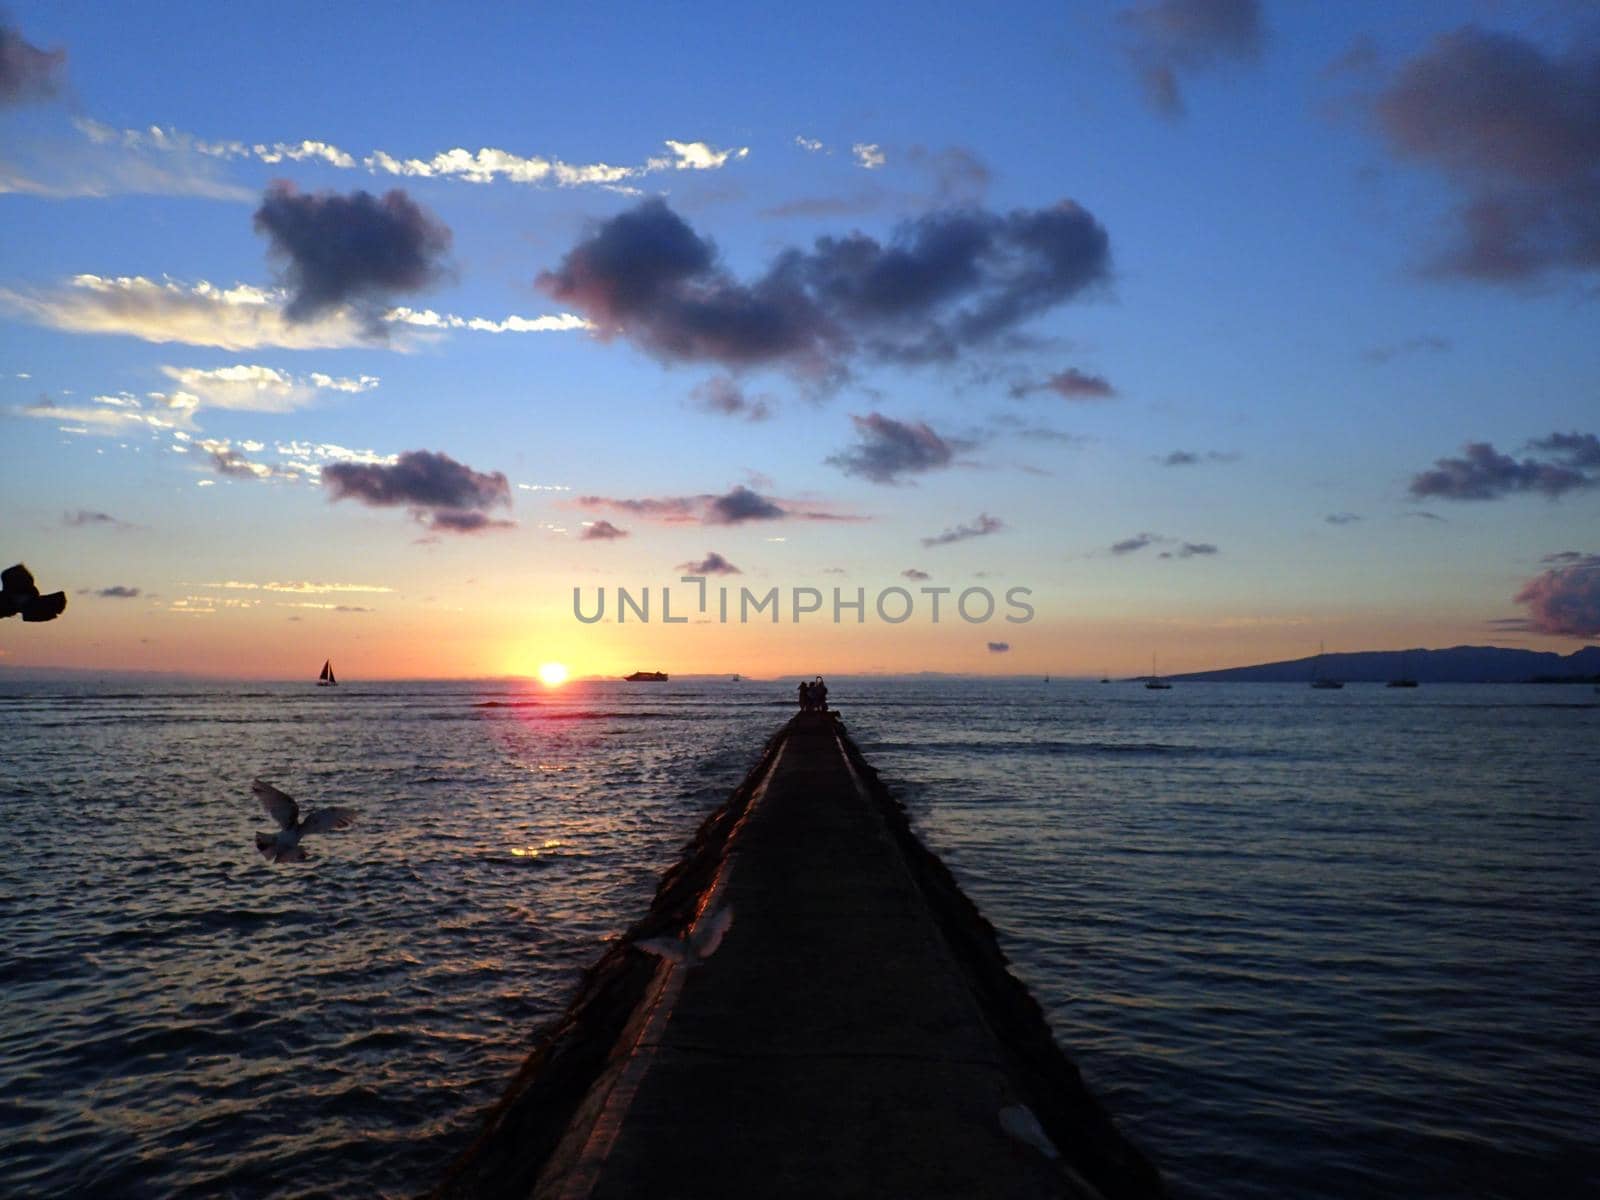 Rock Pier leads to Sunset over the Pacific ocean on the water with birds flying in the foreground and boats off the coast of Oahu, Hawaii with Waianae Mountain range visible. February 2016.